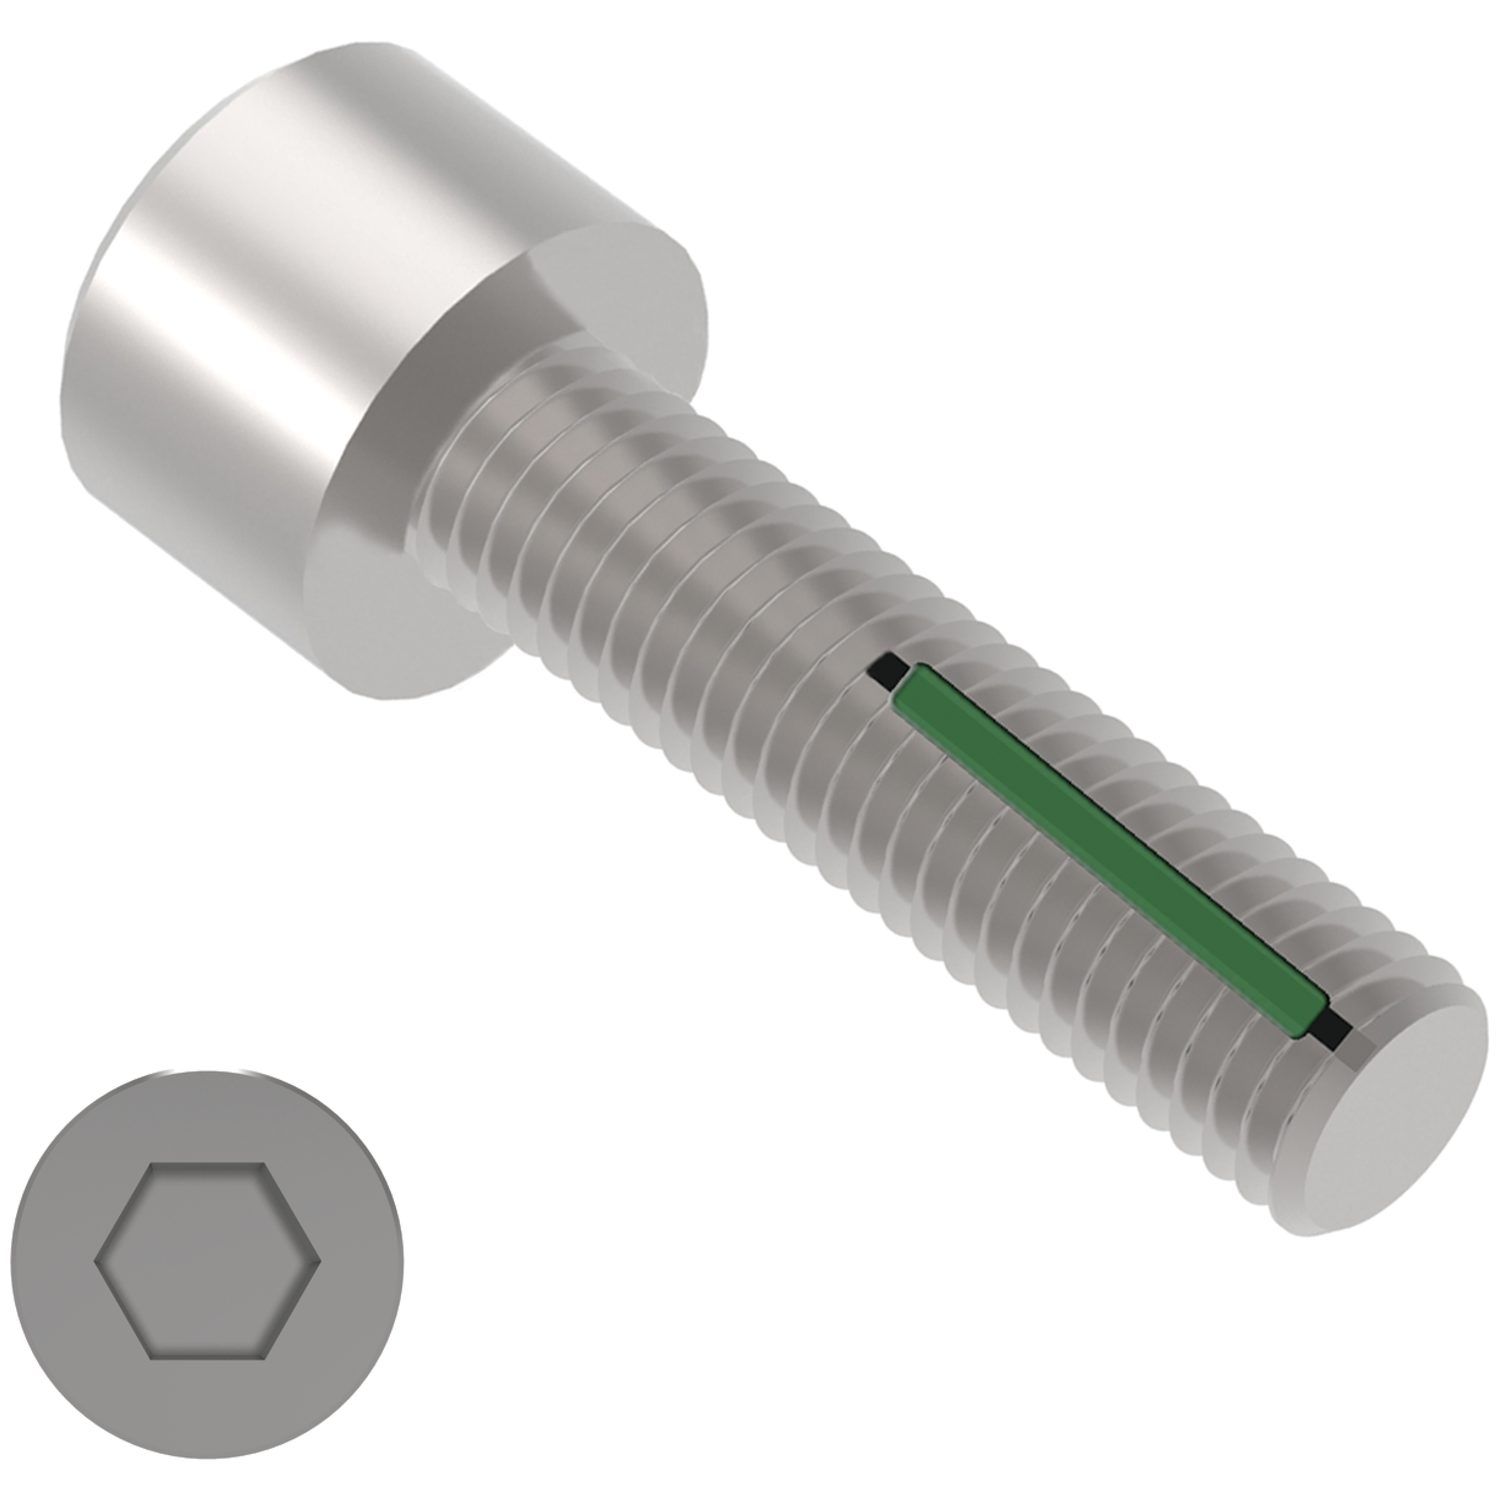 Self-Locking Cap Screws Vibration proof. Standard green locking patch. Breakaway torque values are complex and can be calculated on request.